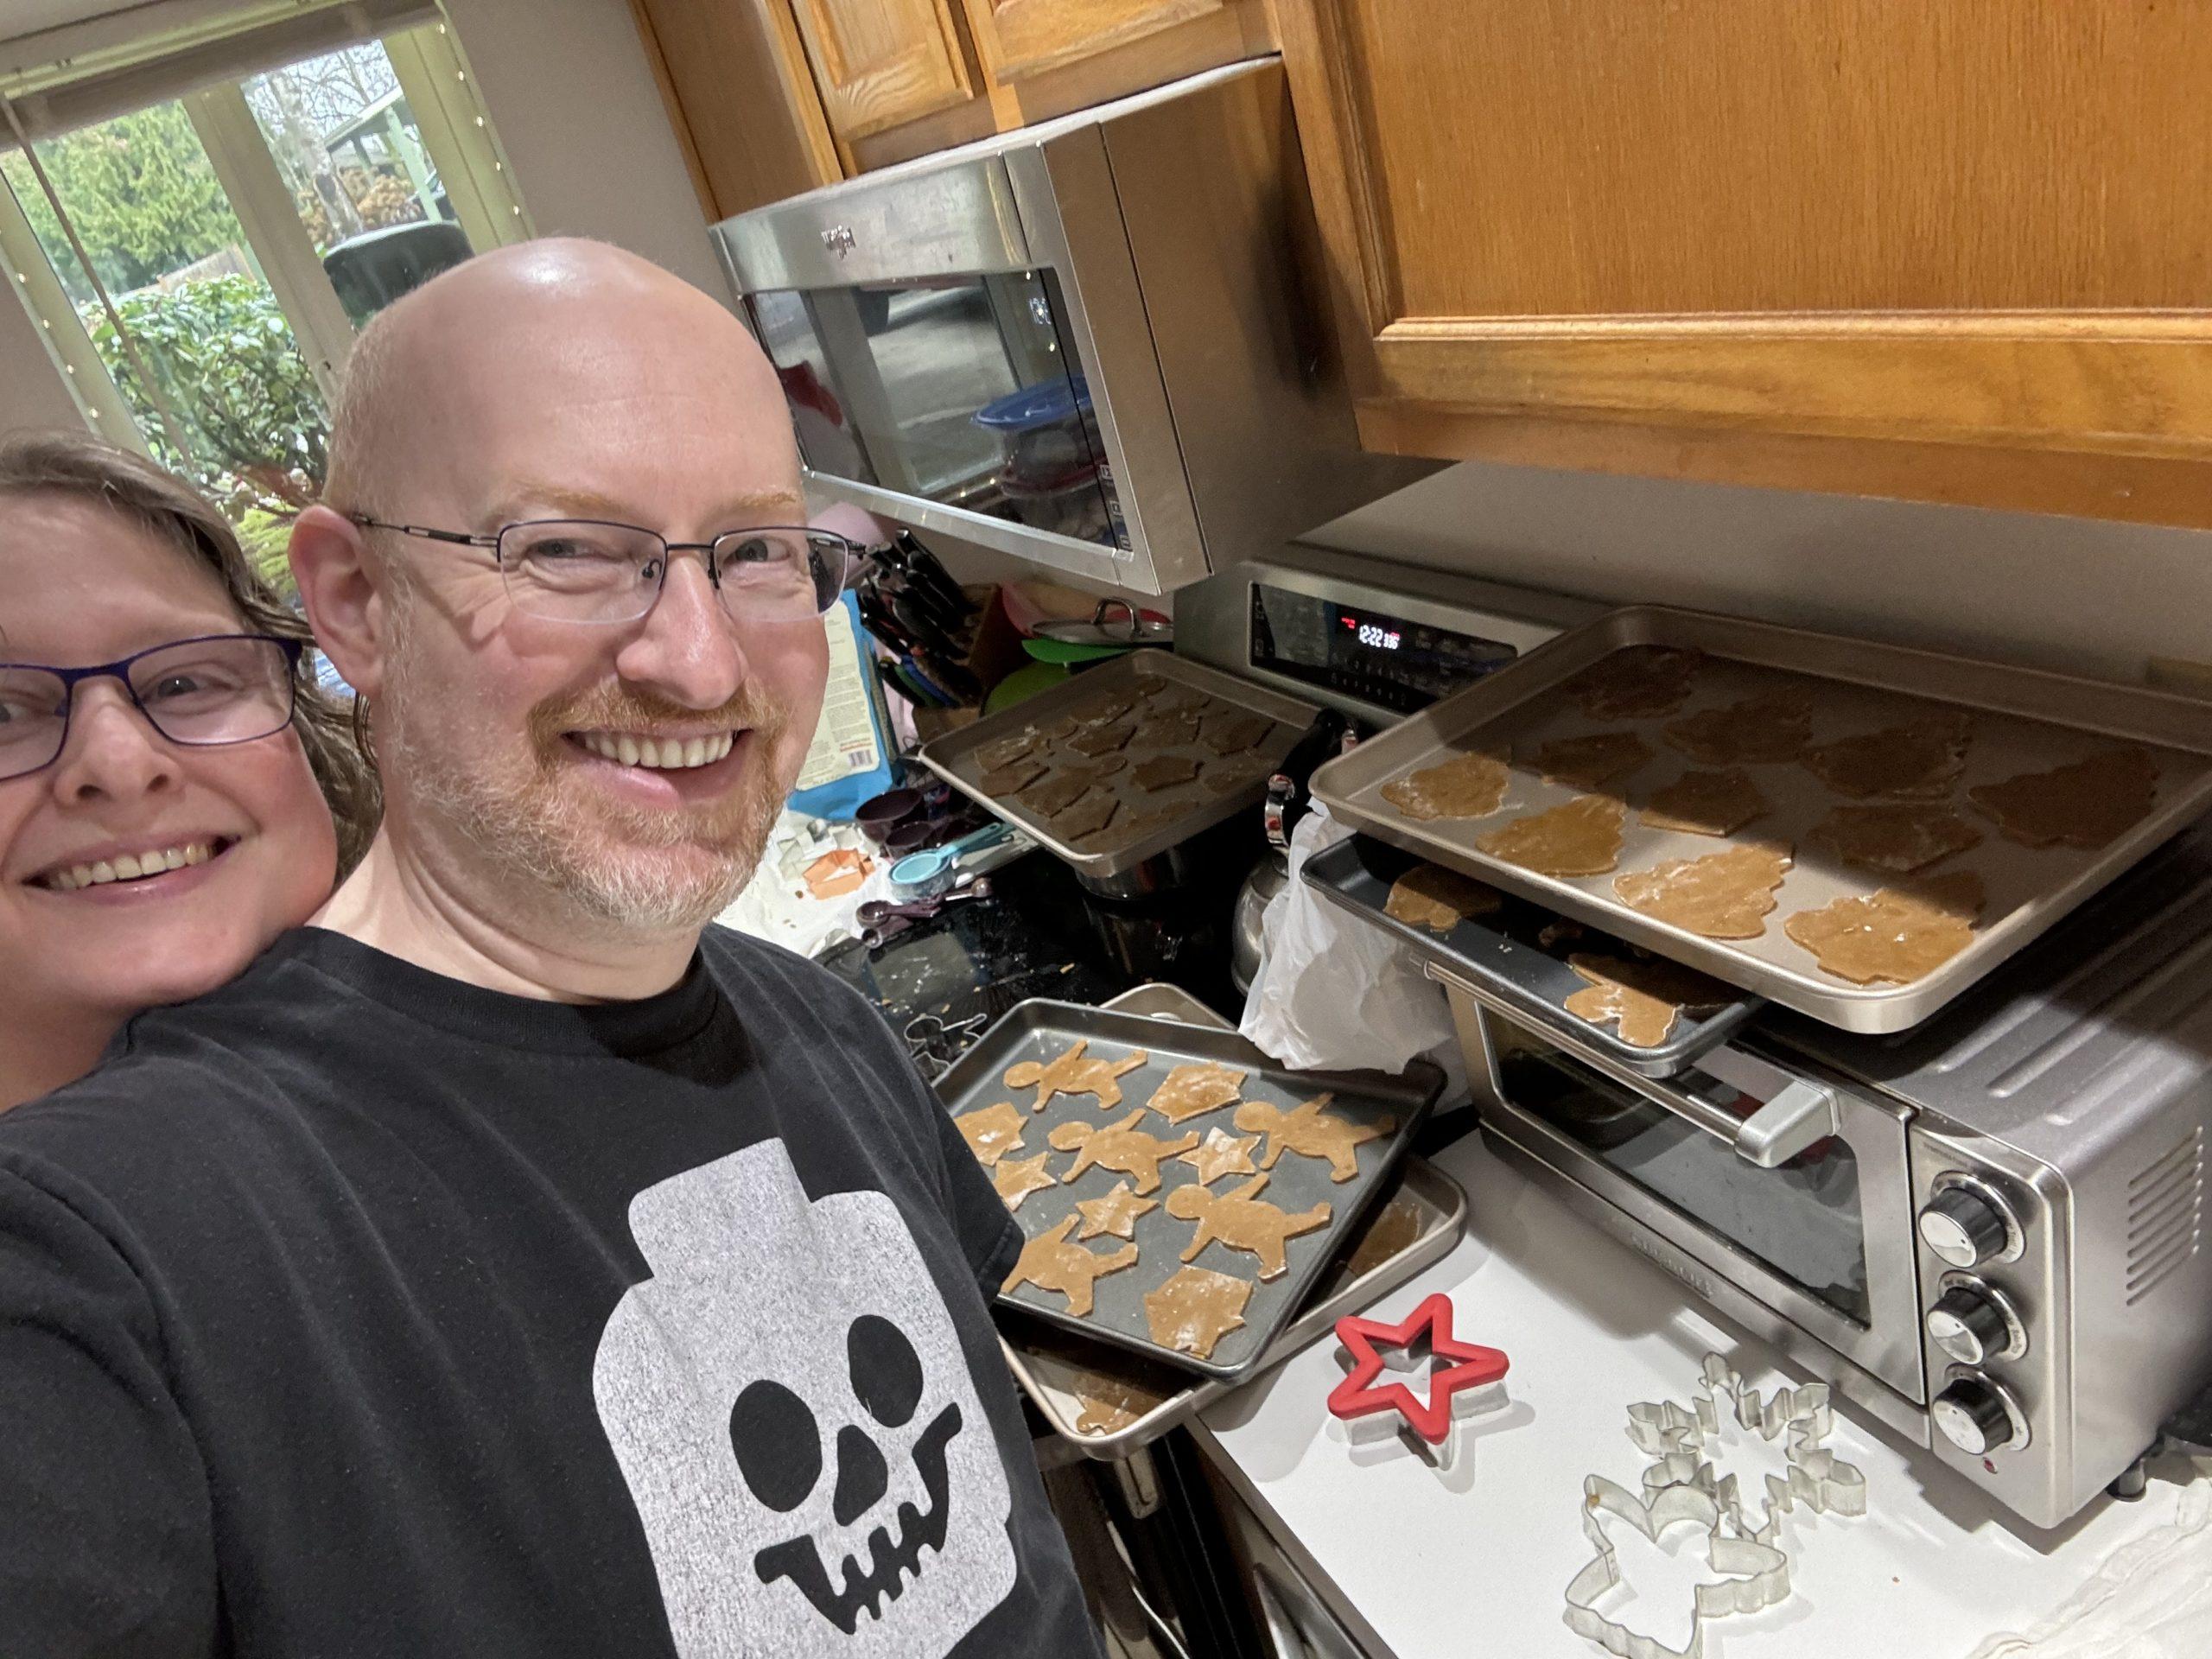 Me in our kitchen, with several baking sheets of gingerbread cookies ready to go in the oven on the counter. My wife is peeking over my shoulder and smiling.